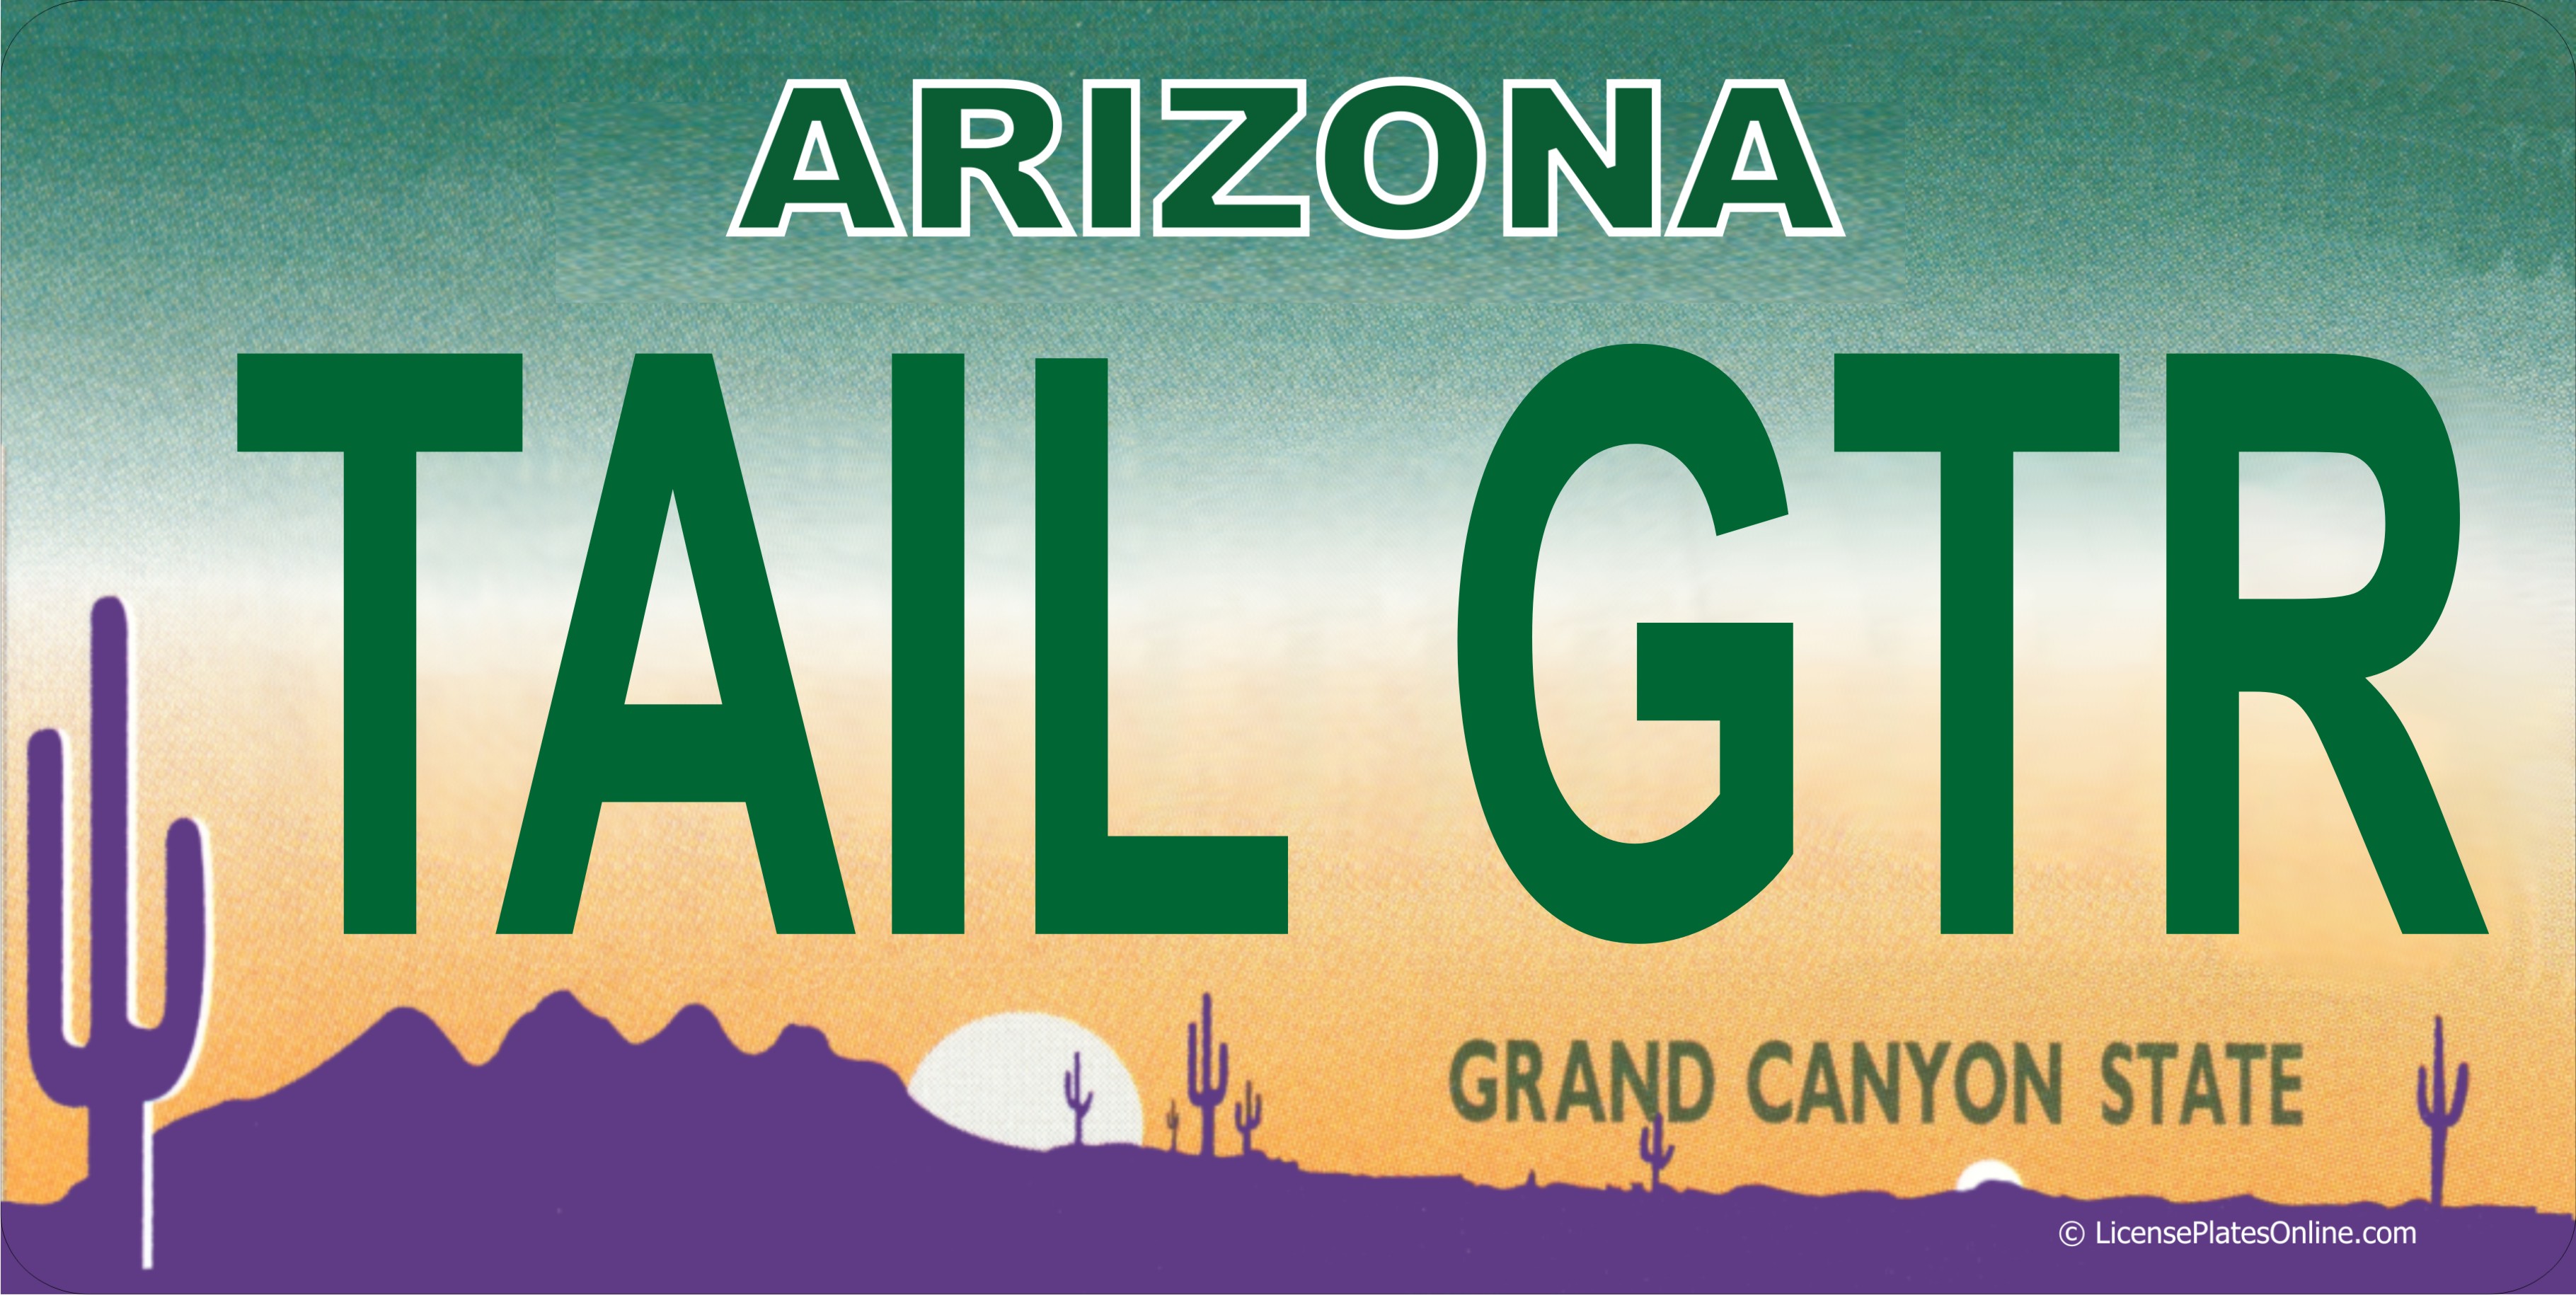 Arizona TAIL GTR Photo LICENSE PLATE   Free Personalization on this PLATE